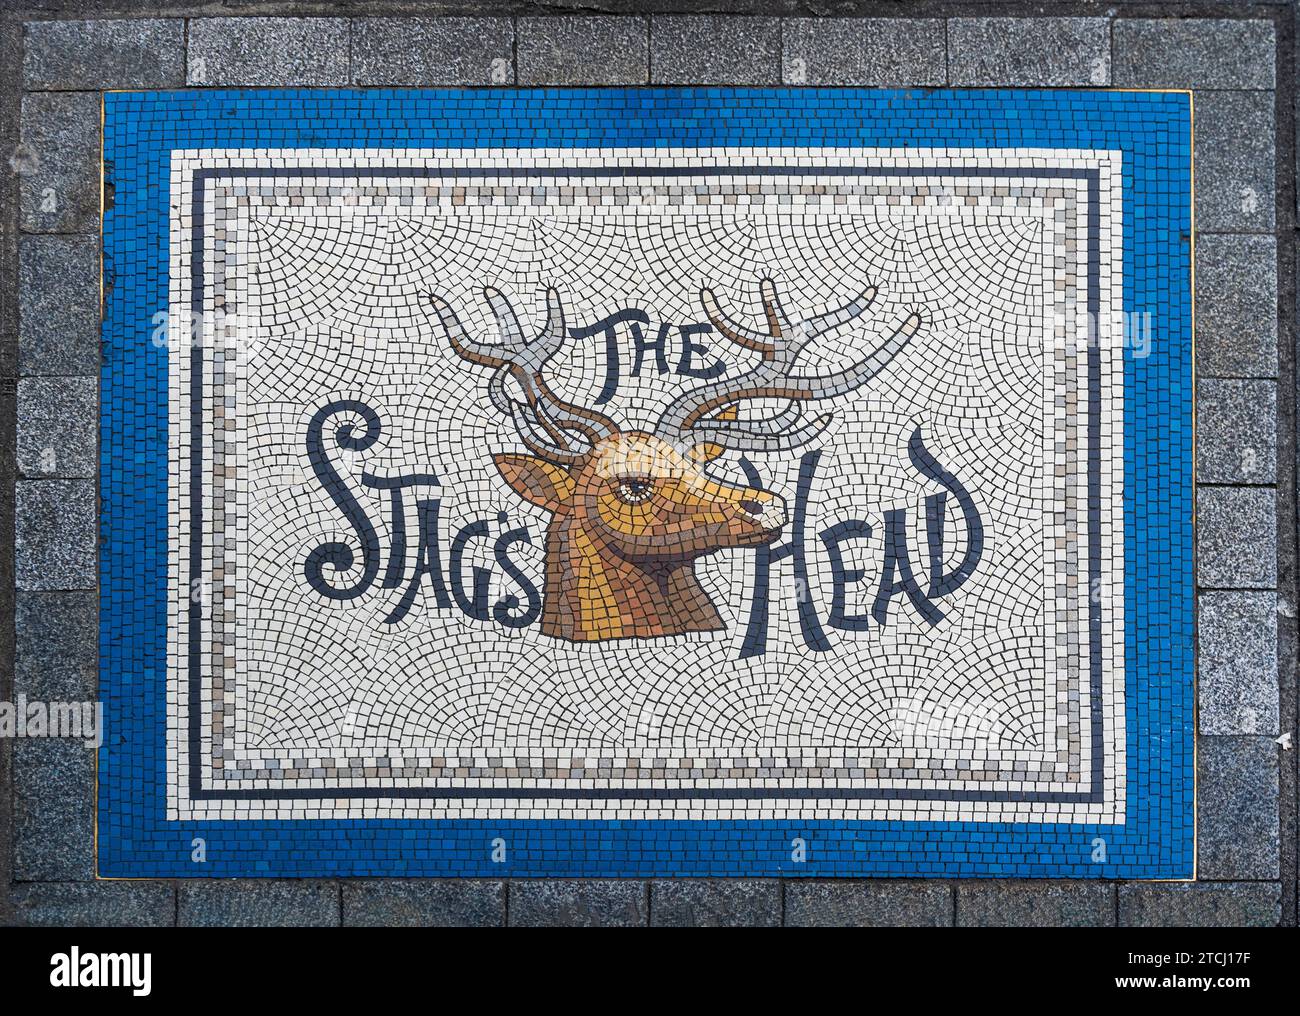 A mosaic pavement in front of the entrance of Stag's Head historical pub in Dame street, Dublin city center, Ireland Stock Photo